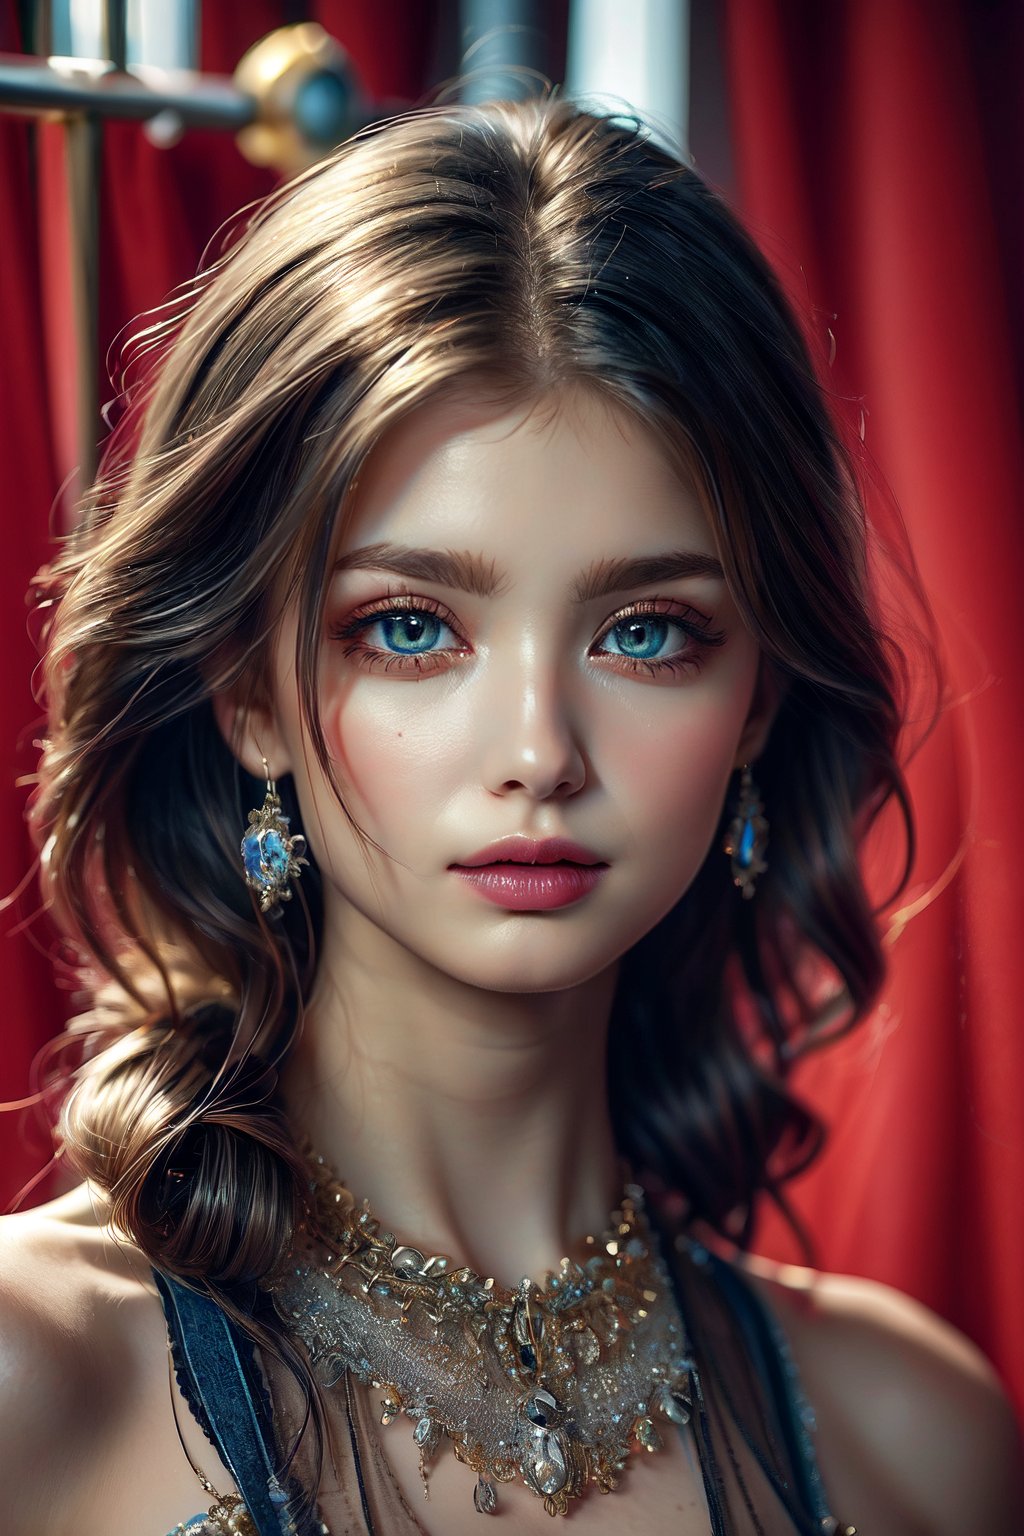 (masterpiece, high quality:1.5), 8K, HDR, 
1girl, well_defined_face, well_defined_eyes, ultra_detailed_eyes, ultra_detailed_face, by FuturEvoLab, 
ethereal lighting, immortal, elegant, porcelain skin, jet-black hair, waves, pale face, ice-blue eyes, blood-red lips, pinhole photograph, retro aesthetic, monochromatic backdrop, mysterious, enigmatic, timeless allure, the siren of the night, secrets, longing, hidden dangers, captivating, nostalgia, timeless fascination, Edge feathering and holy light, Exquisite face, Exquisite face, Exquisite face,Exquisite face